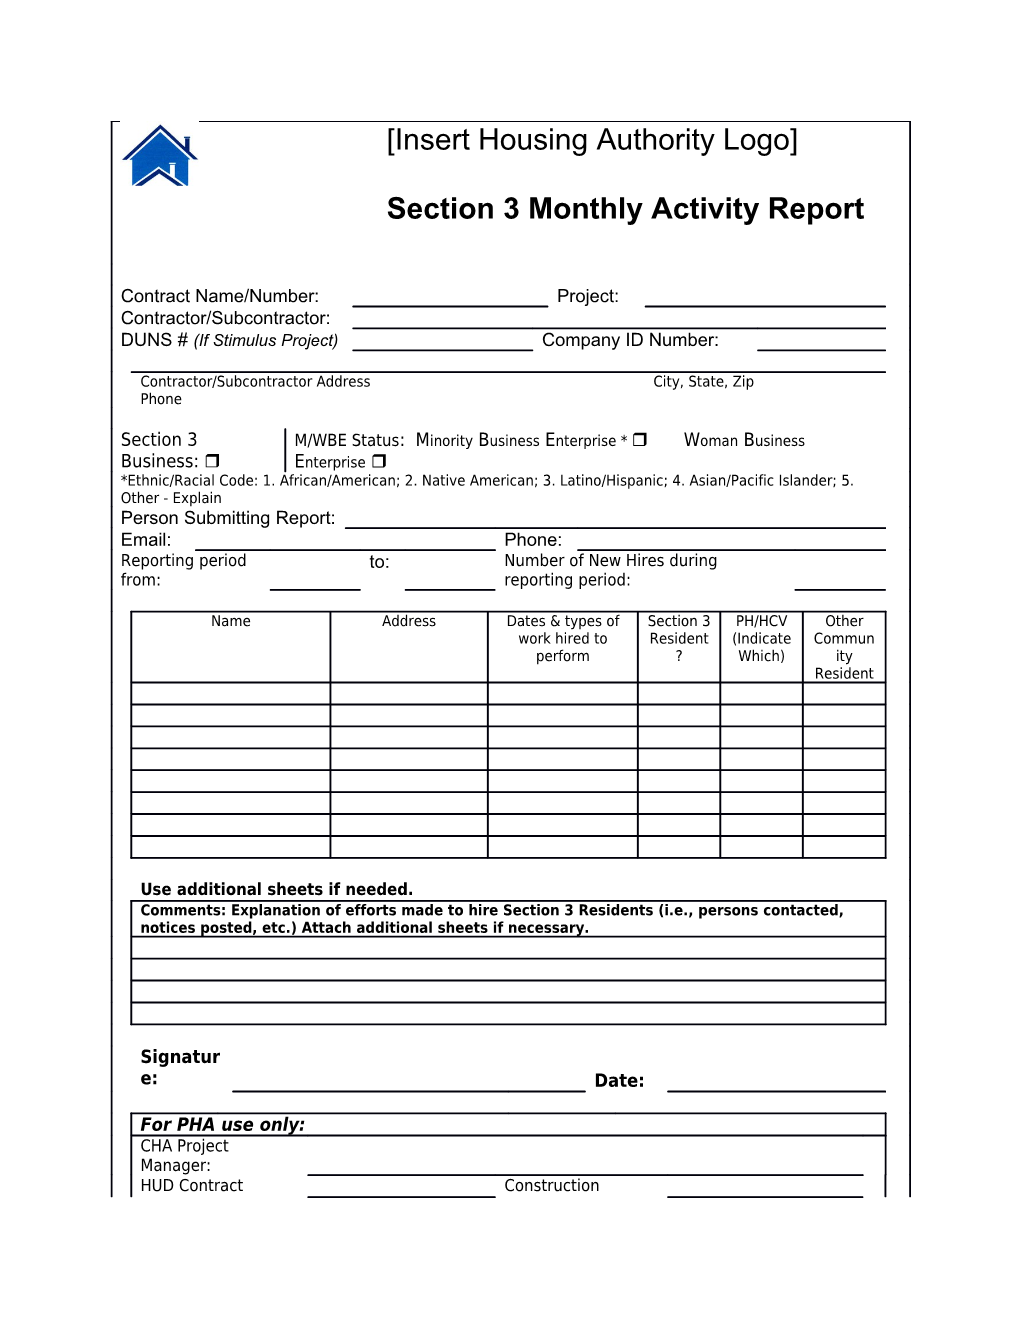 Insert Housing Authority Logo Section 3 Monthly Activity Report